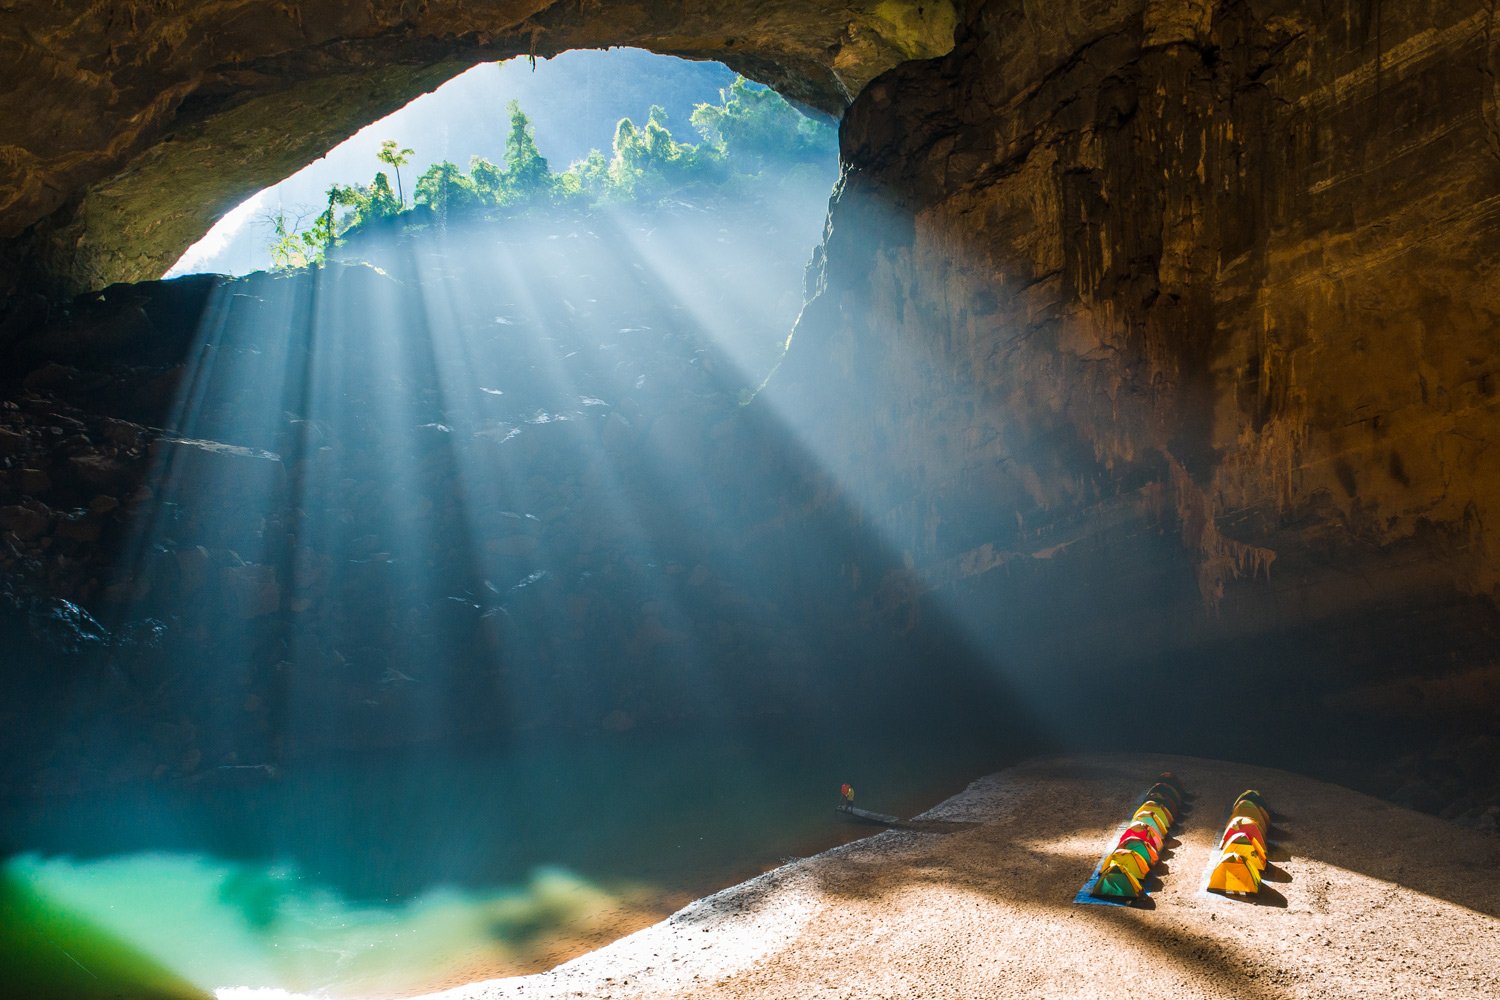 From December to March every year, Hang En welcomes huge rays of sunlight shining into the cave entrance, brightening and warming up the cave campsite.